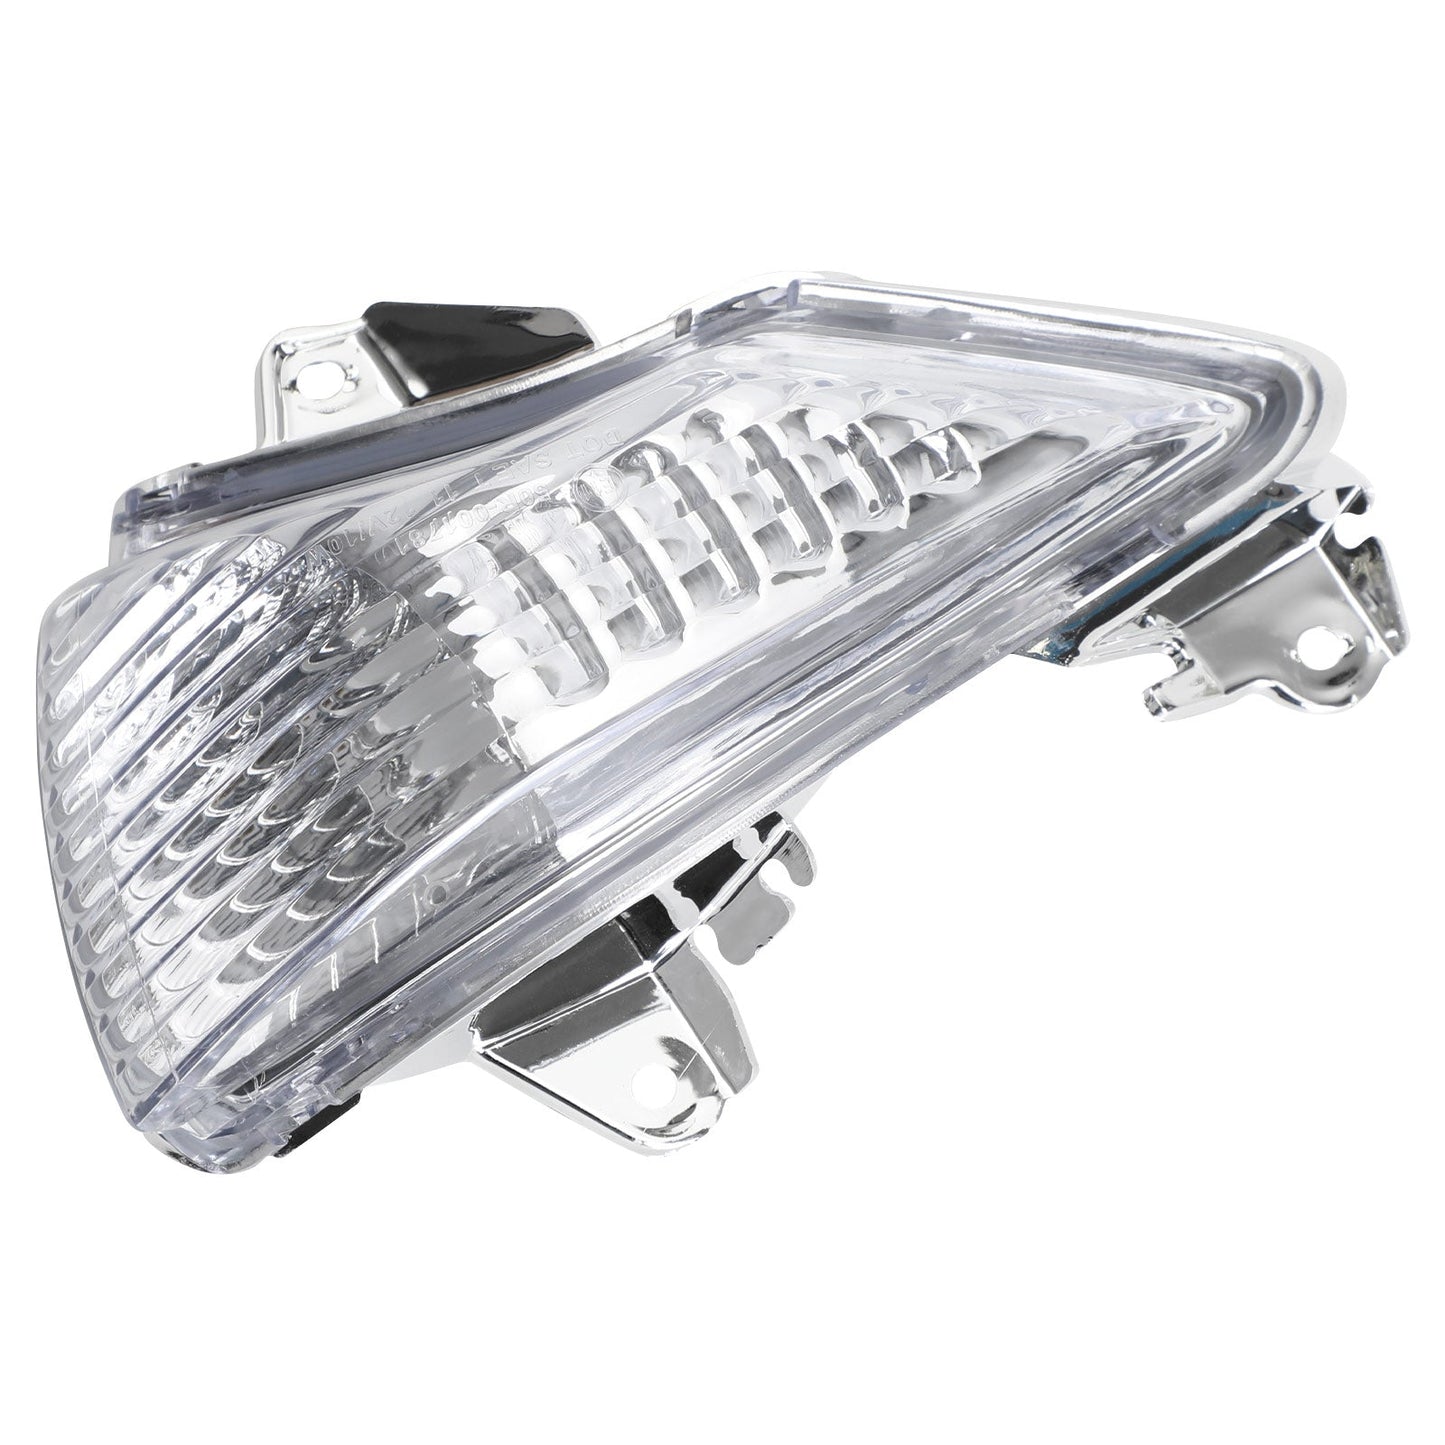 Front Turn Signals Cover For Kawasaki ER-6N EX650 Ninja 650 400R EX400 Clear